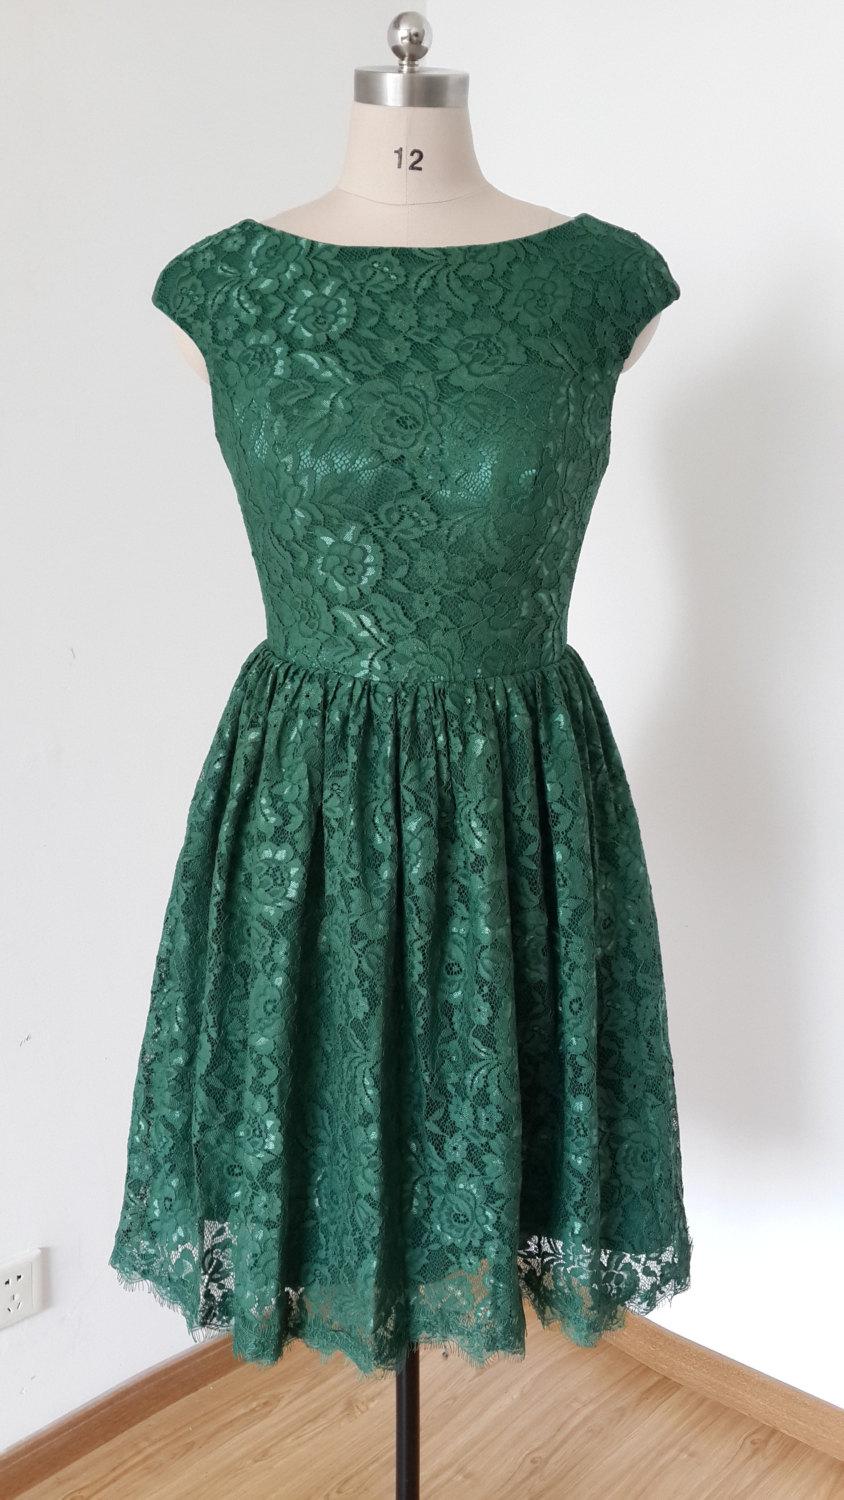 Wedding - 2015 Cap Sleeves Dark Green Lace Short Bridesmaid Dress with Back Buttons